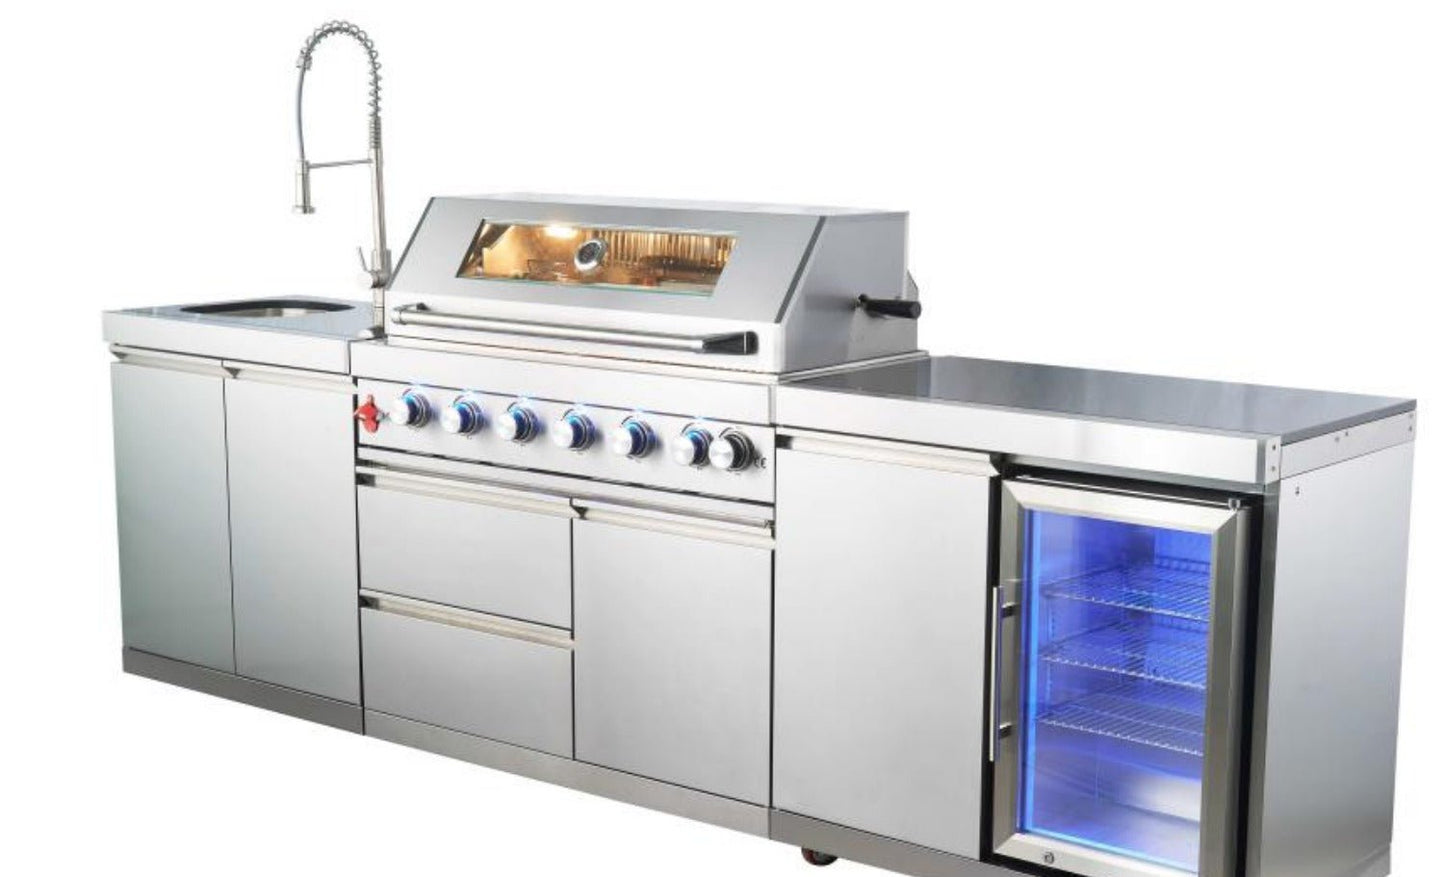 100.5 Inch Stainless Steel Outdoor Modular Kitchen with Single Refrigerator, Sink, Storage Cabinet and 103,000 BTU Built in Grill - Sunzout Outdoor Spaces LLC